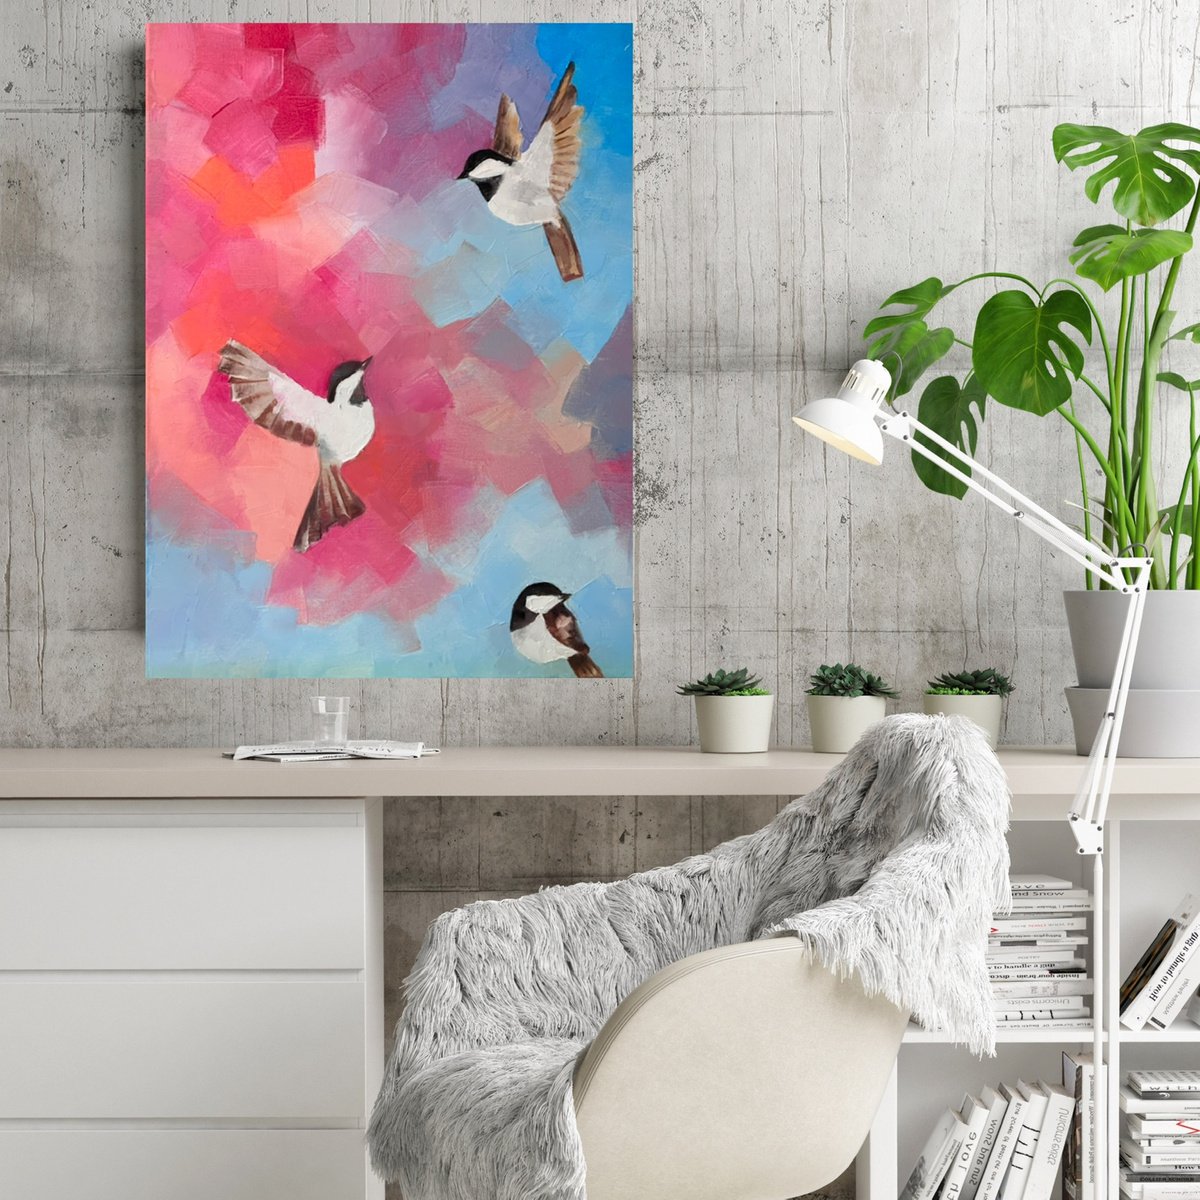 Abstract blooming garden with birds by Olha Gitman